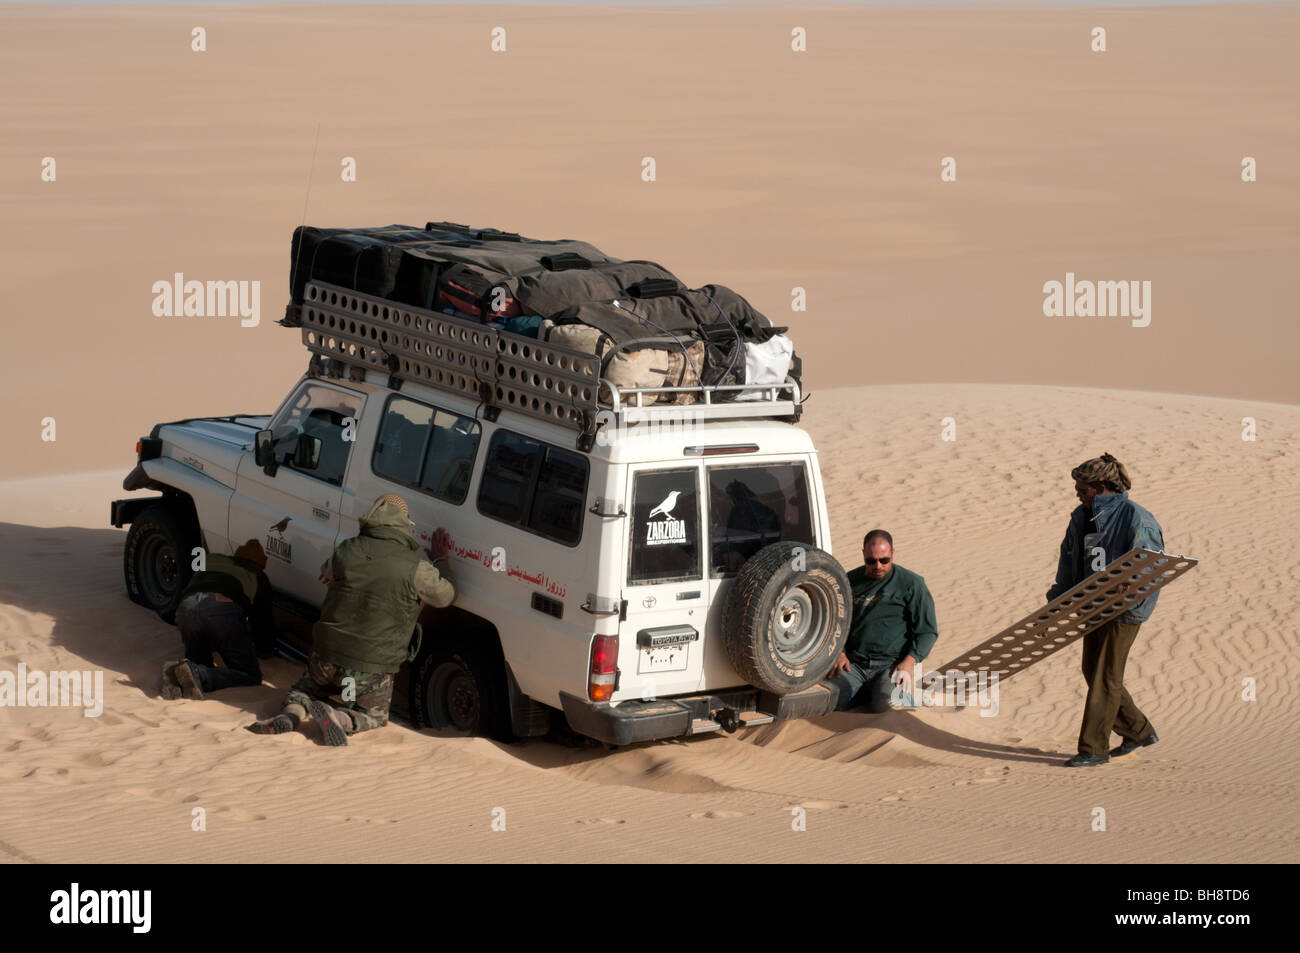 A desert safari land cruiser 4x4 jeep gets stuck in a patch of soft sand in the Great Sand Sea of the Western Desert, Egyptian Sahara, Egypt. Stock Photo